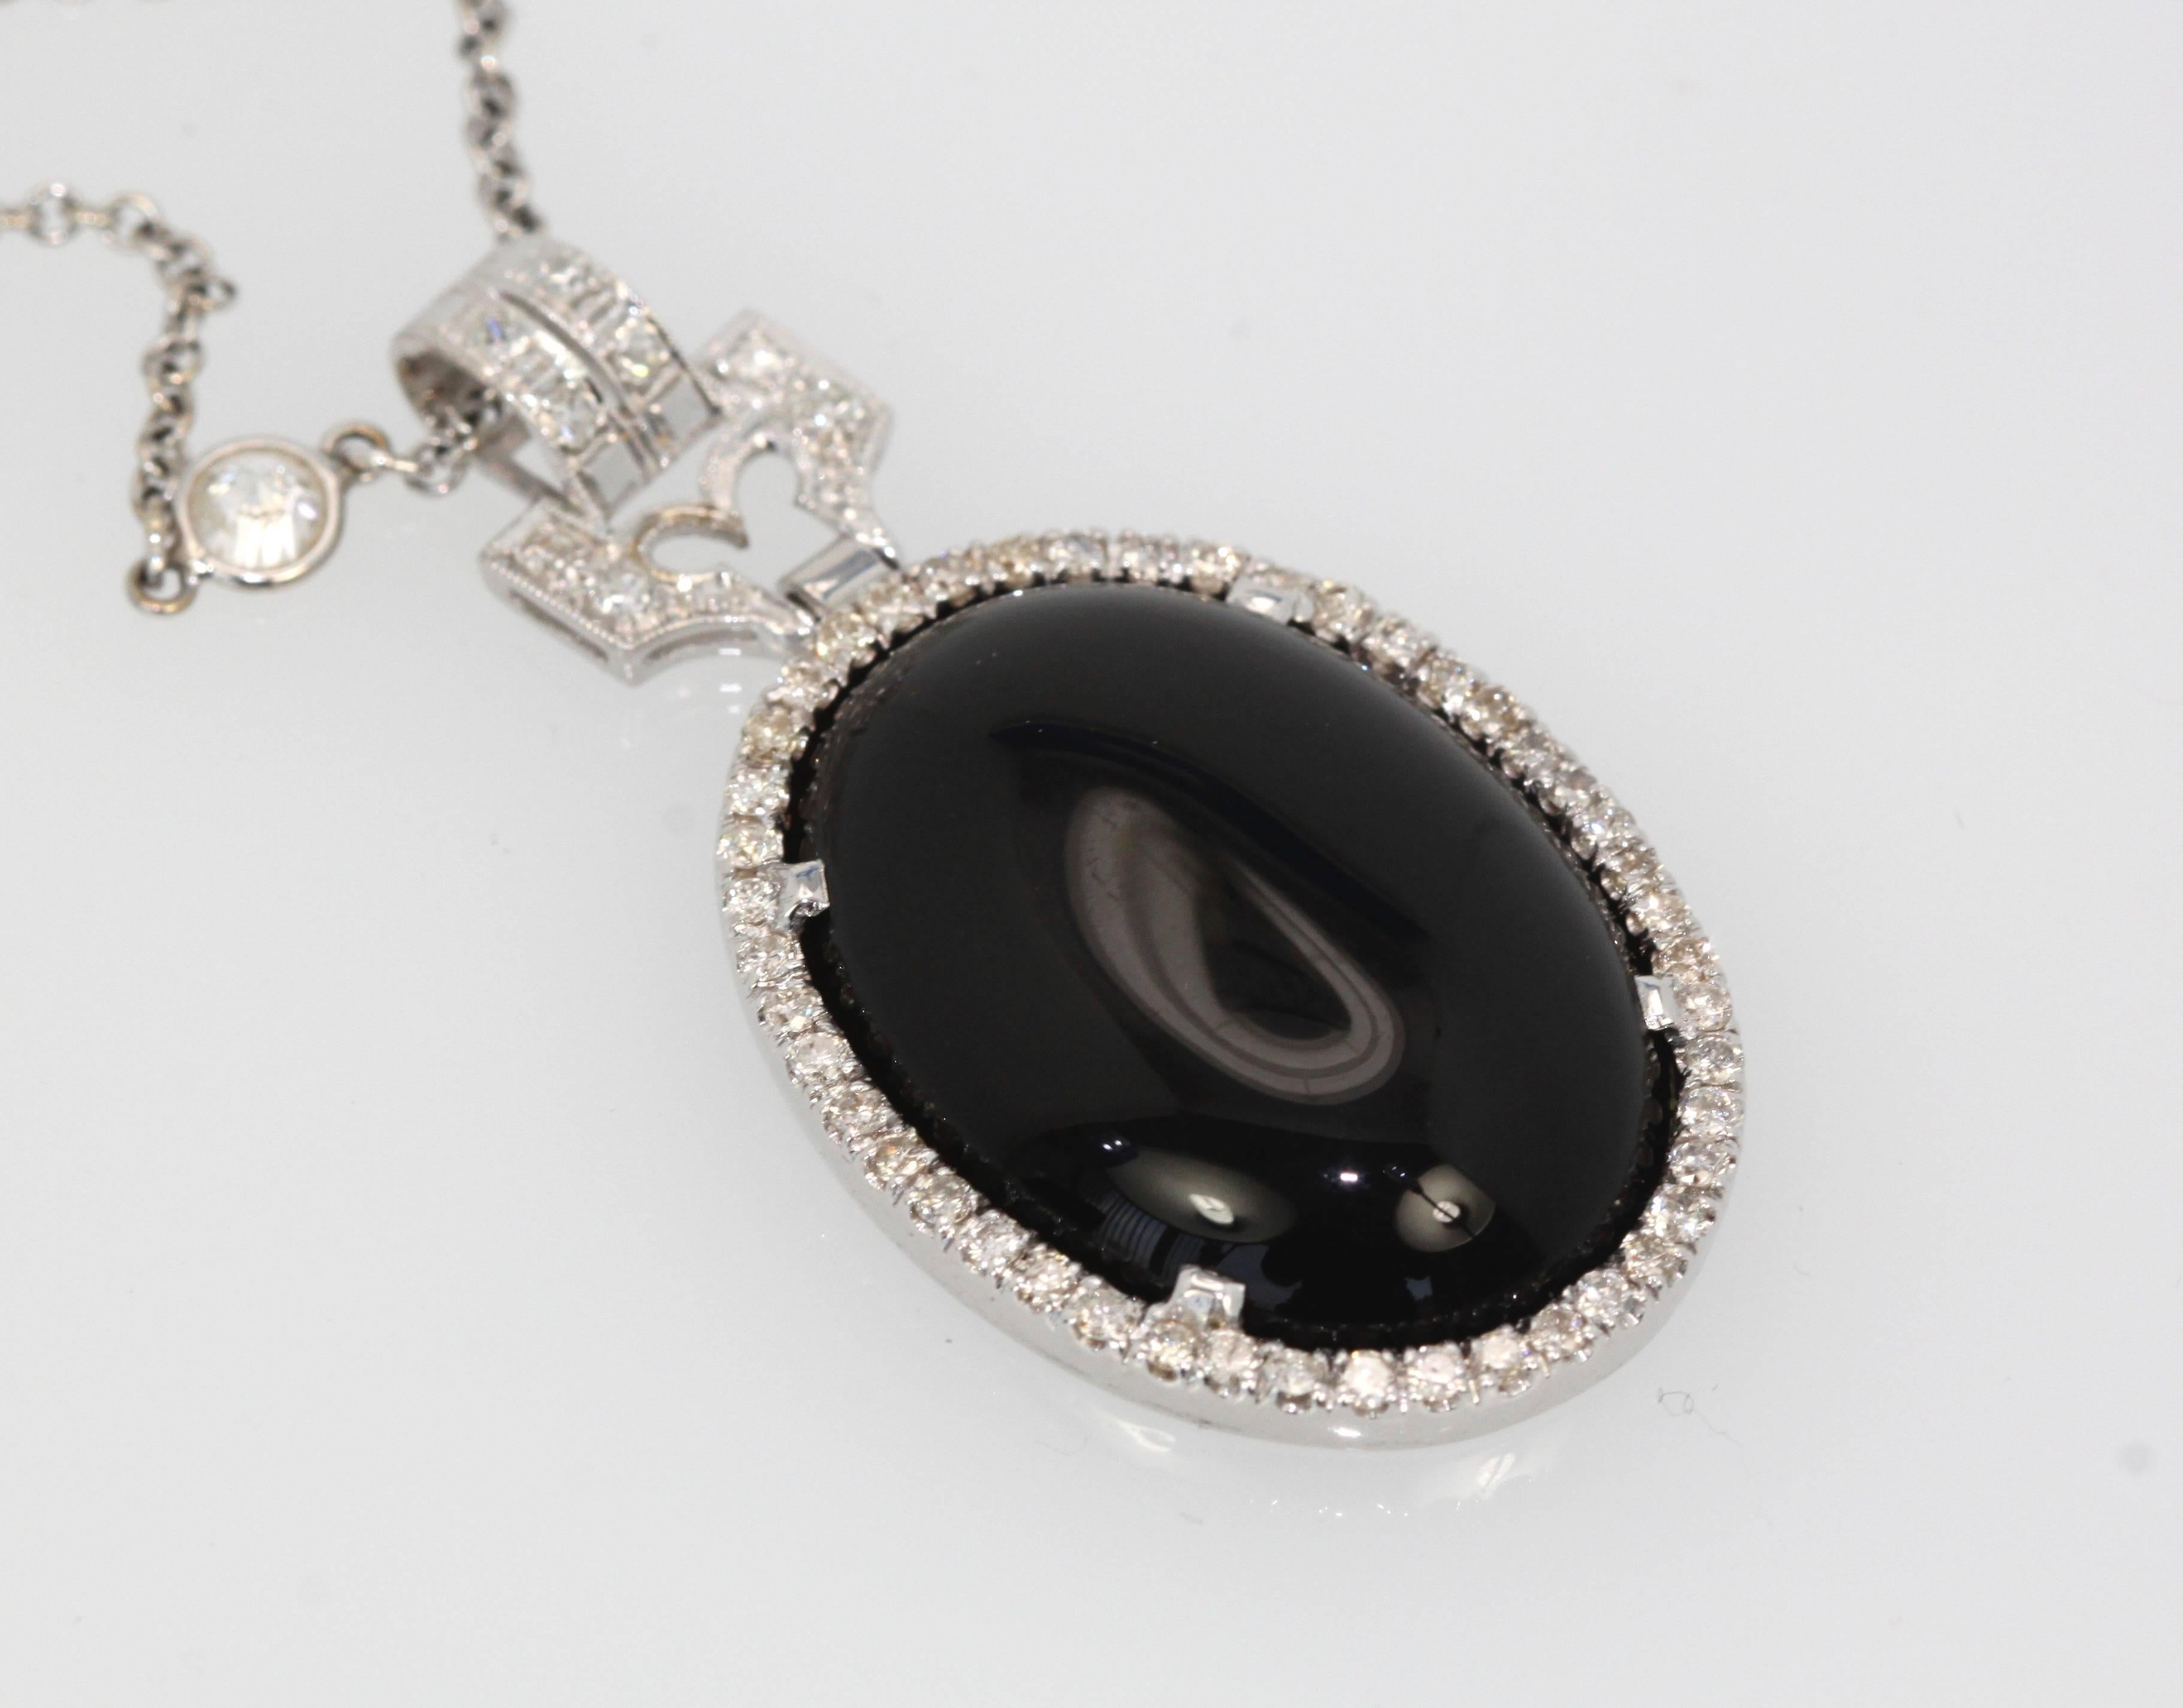 This Art Deco Onyx Platinum Pendant has 1.50 carats in the Diamond Surround.  The Onyx Plaque is  2.9 cm
This simple onyx Pendant works with almost anything you wear.  The Diamonds are G-H VS2-SI1.  The onyx has a high shine and brilliant. I